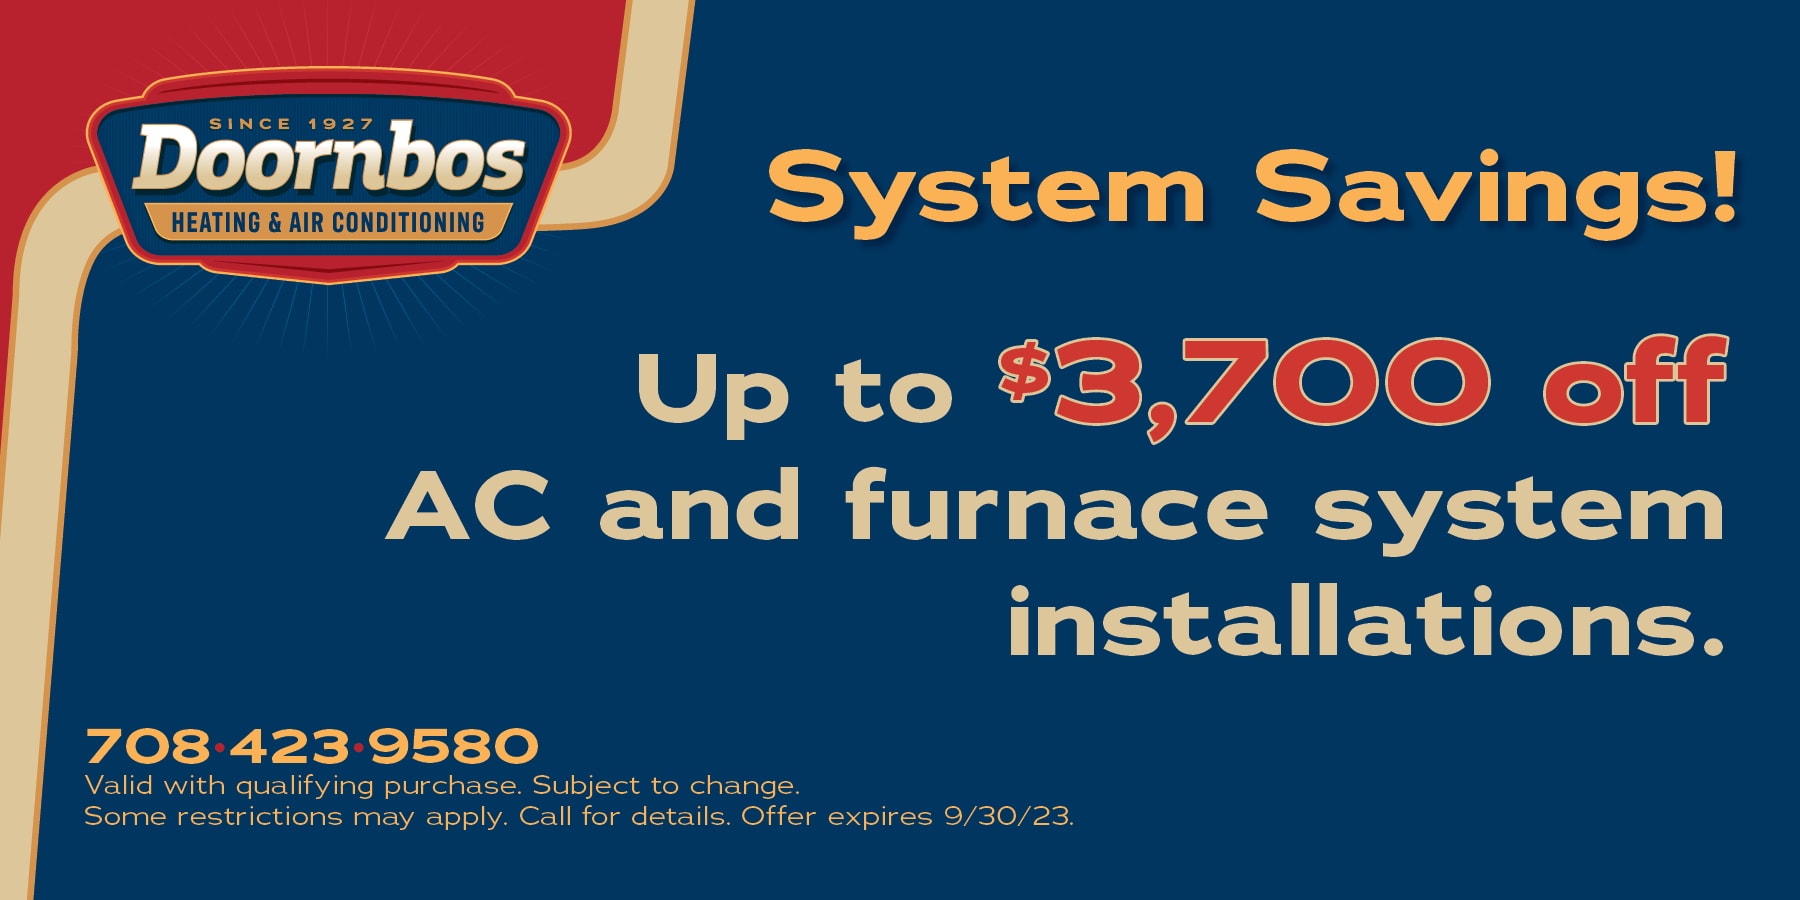 SYSTEM SAVINGS! Up to ,700 off AC & Furnace System Installations